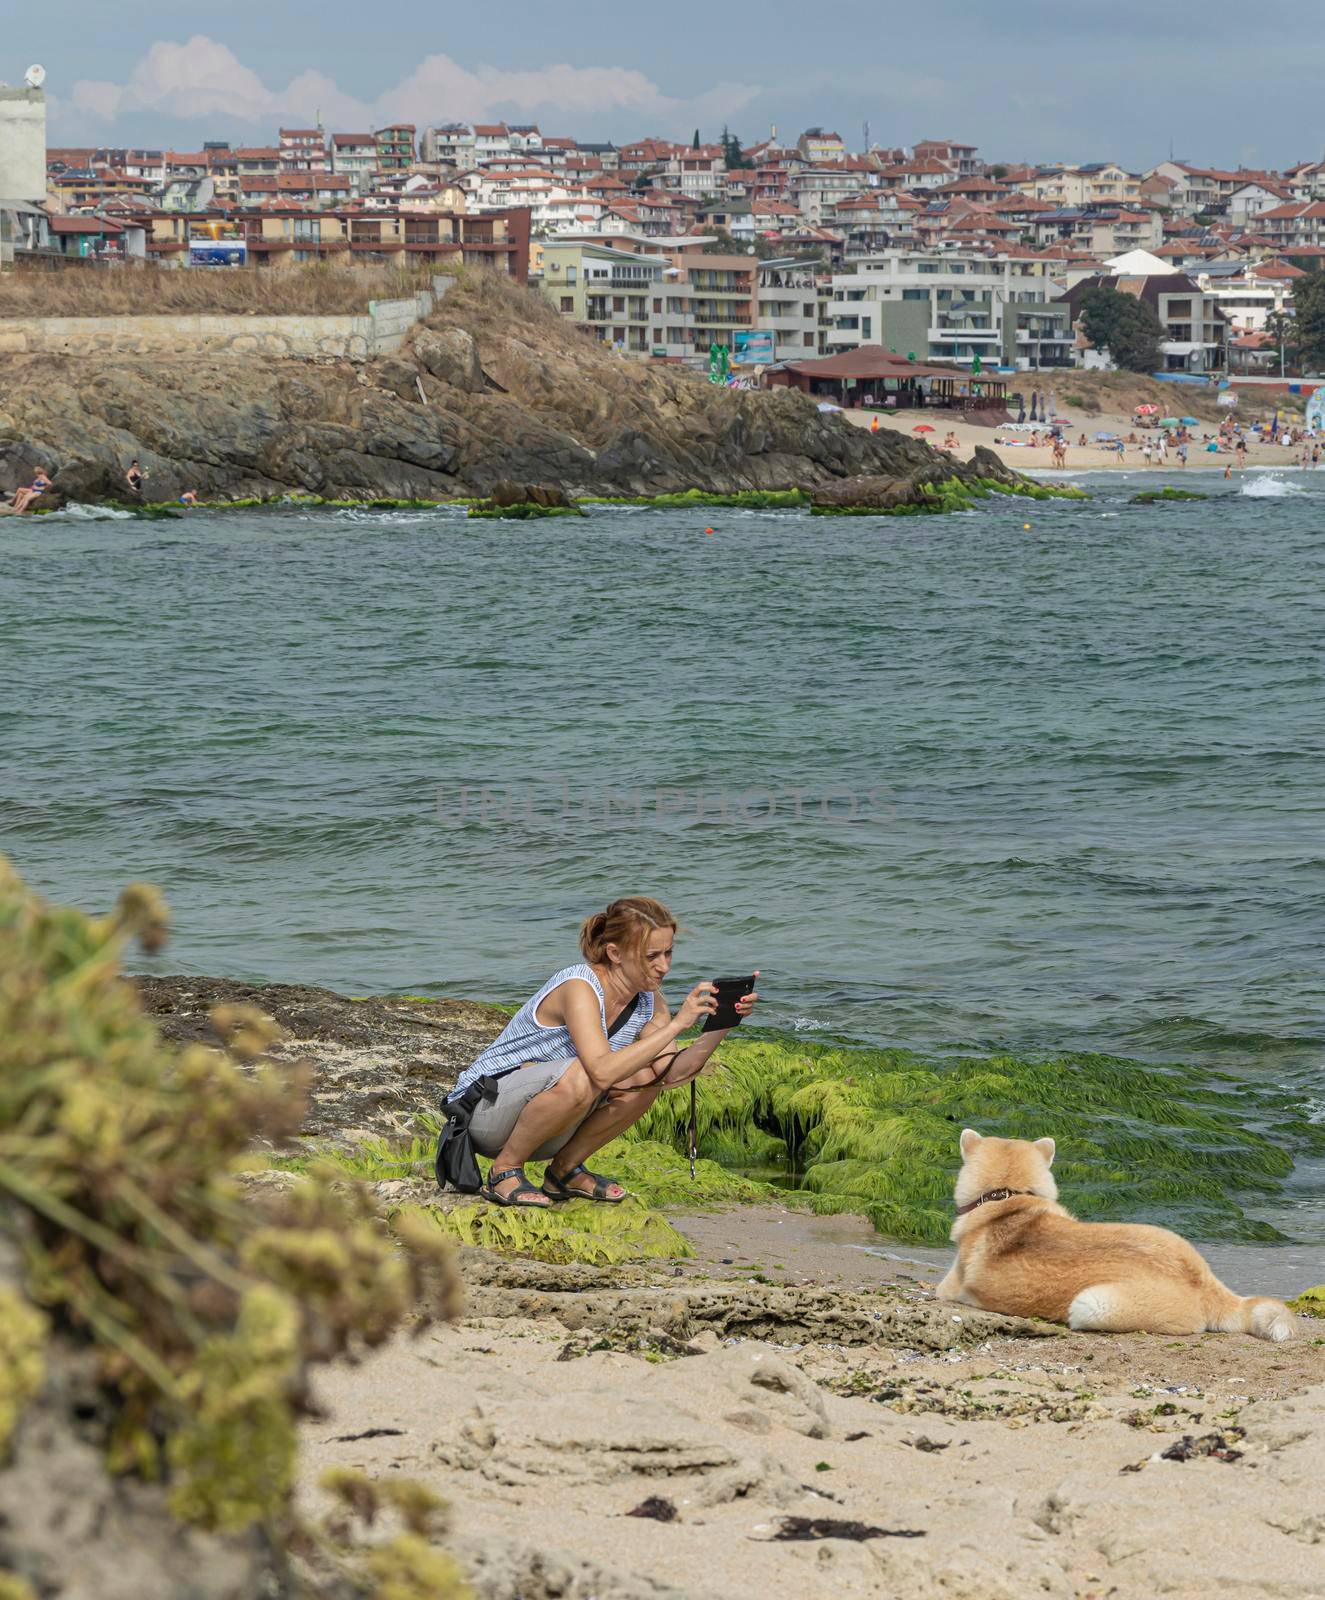 Bulgaria, SOZOPOL - 2018, 06 September: A woman photographs a dog on a rocky beach, blurred background. Stock photo.